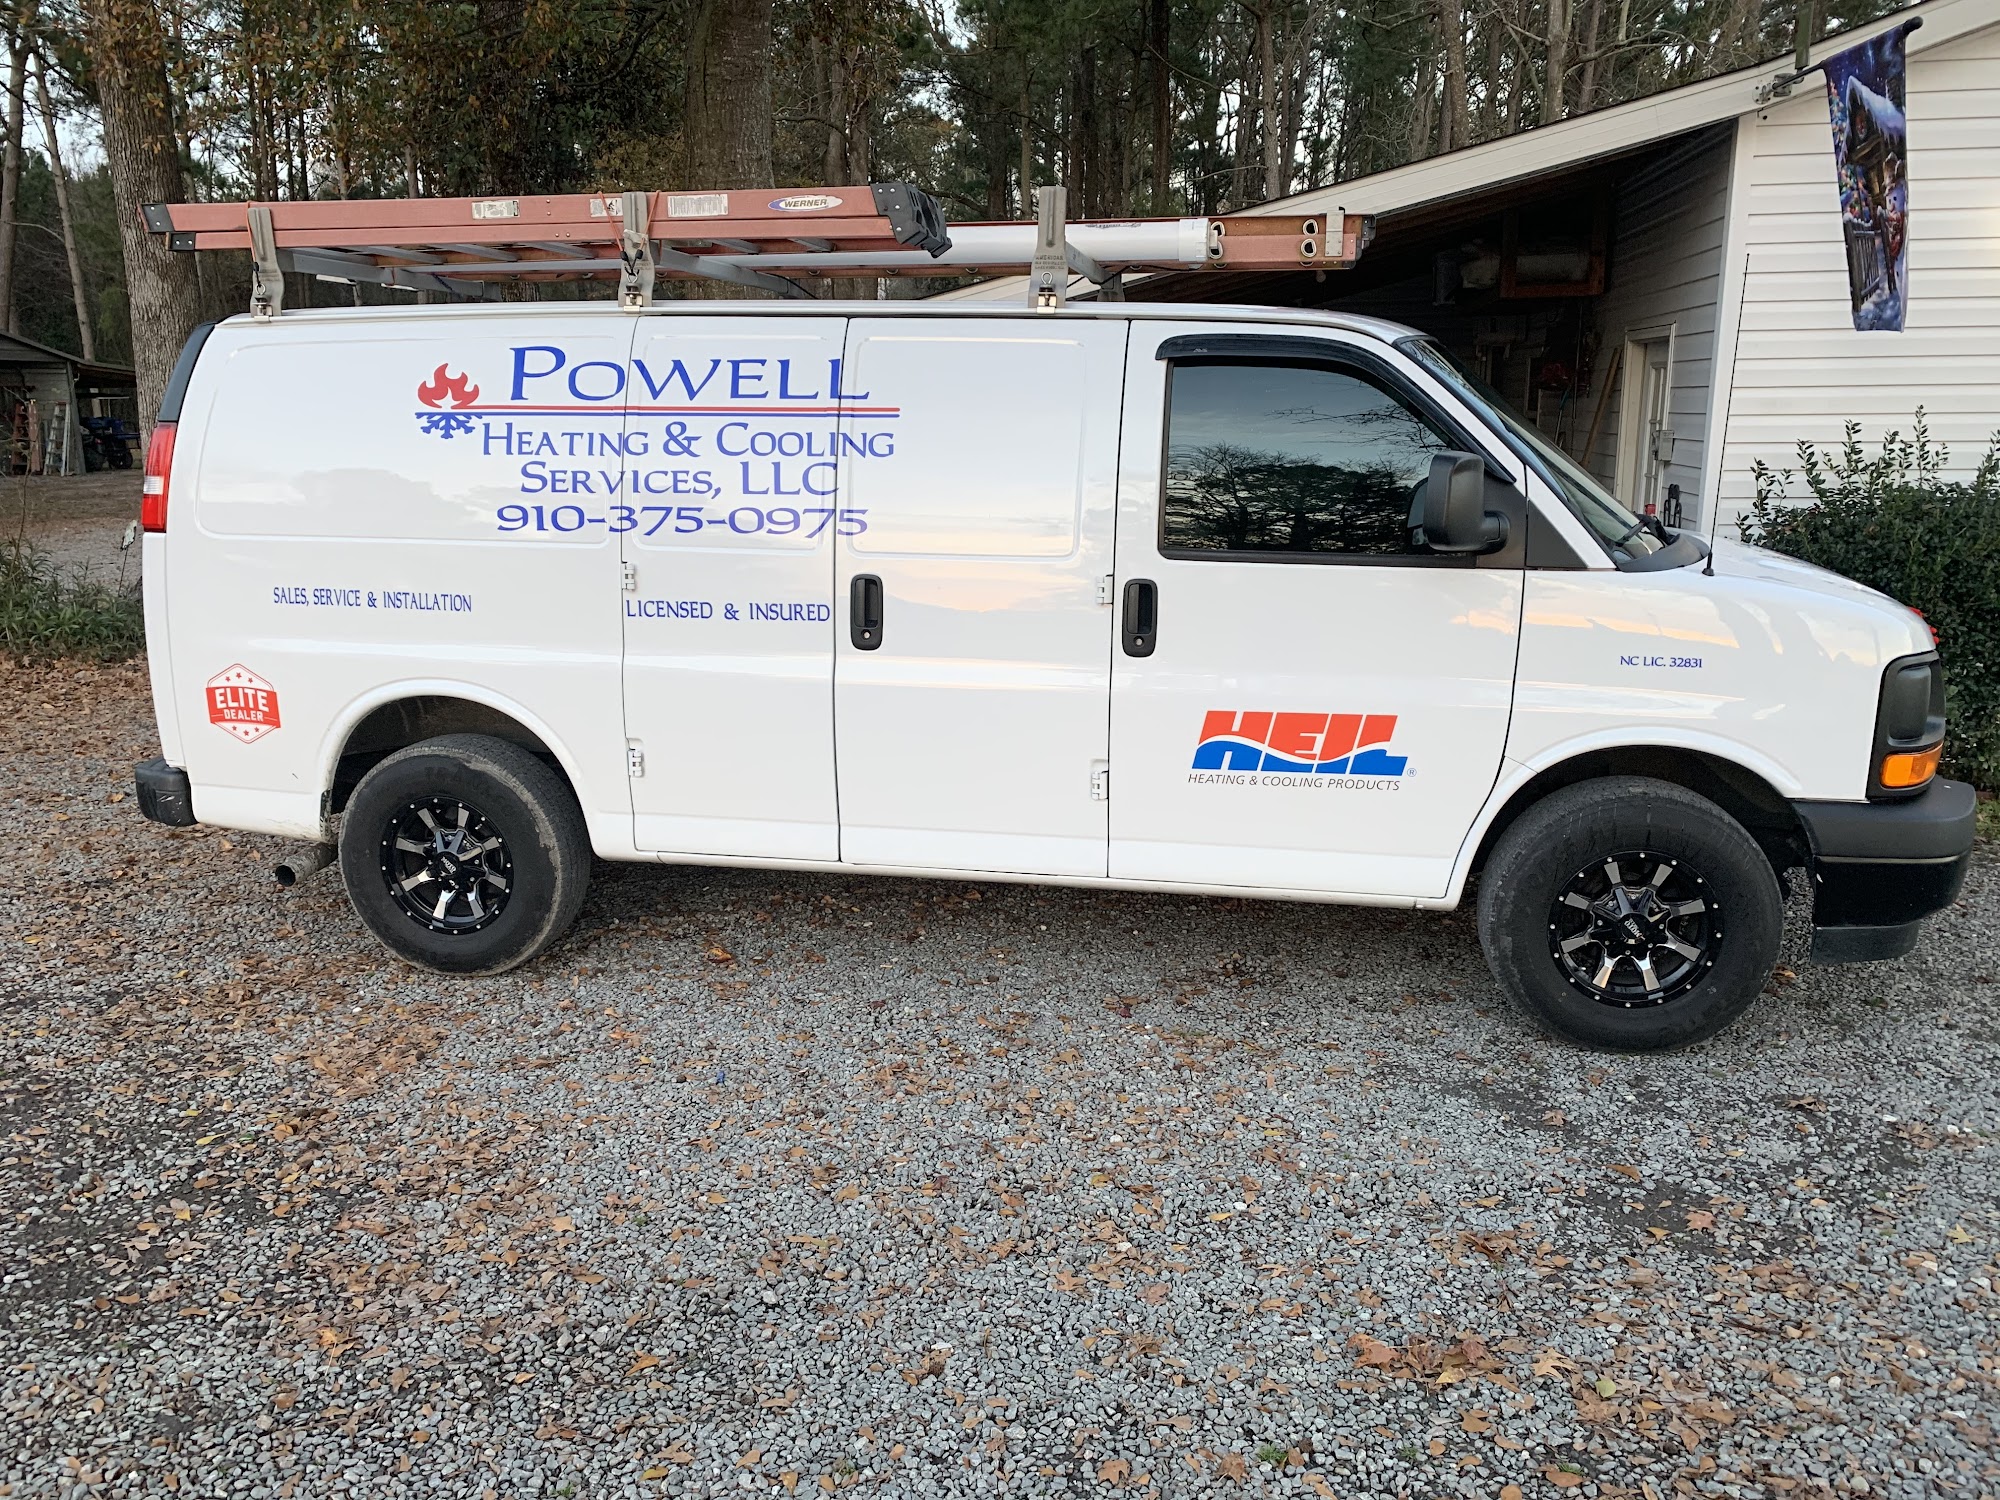 Powell Heating & Cooling Services, LLC